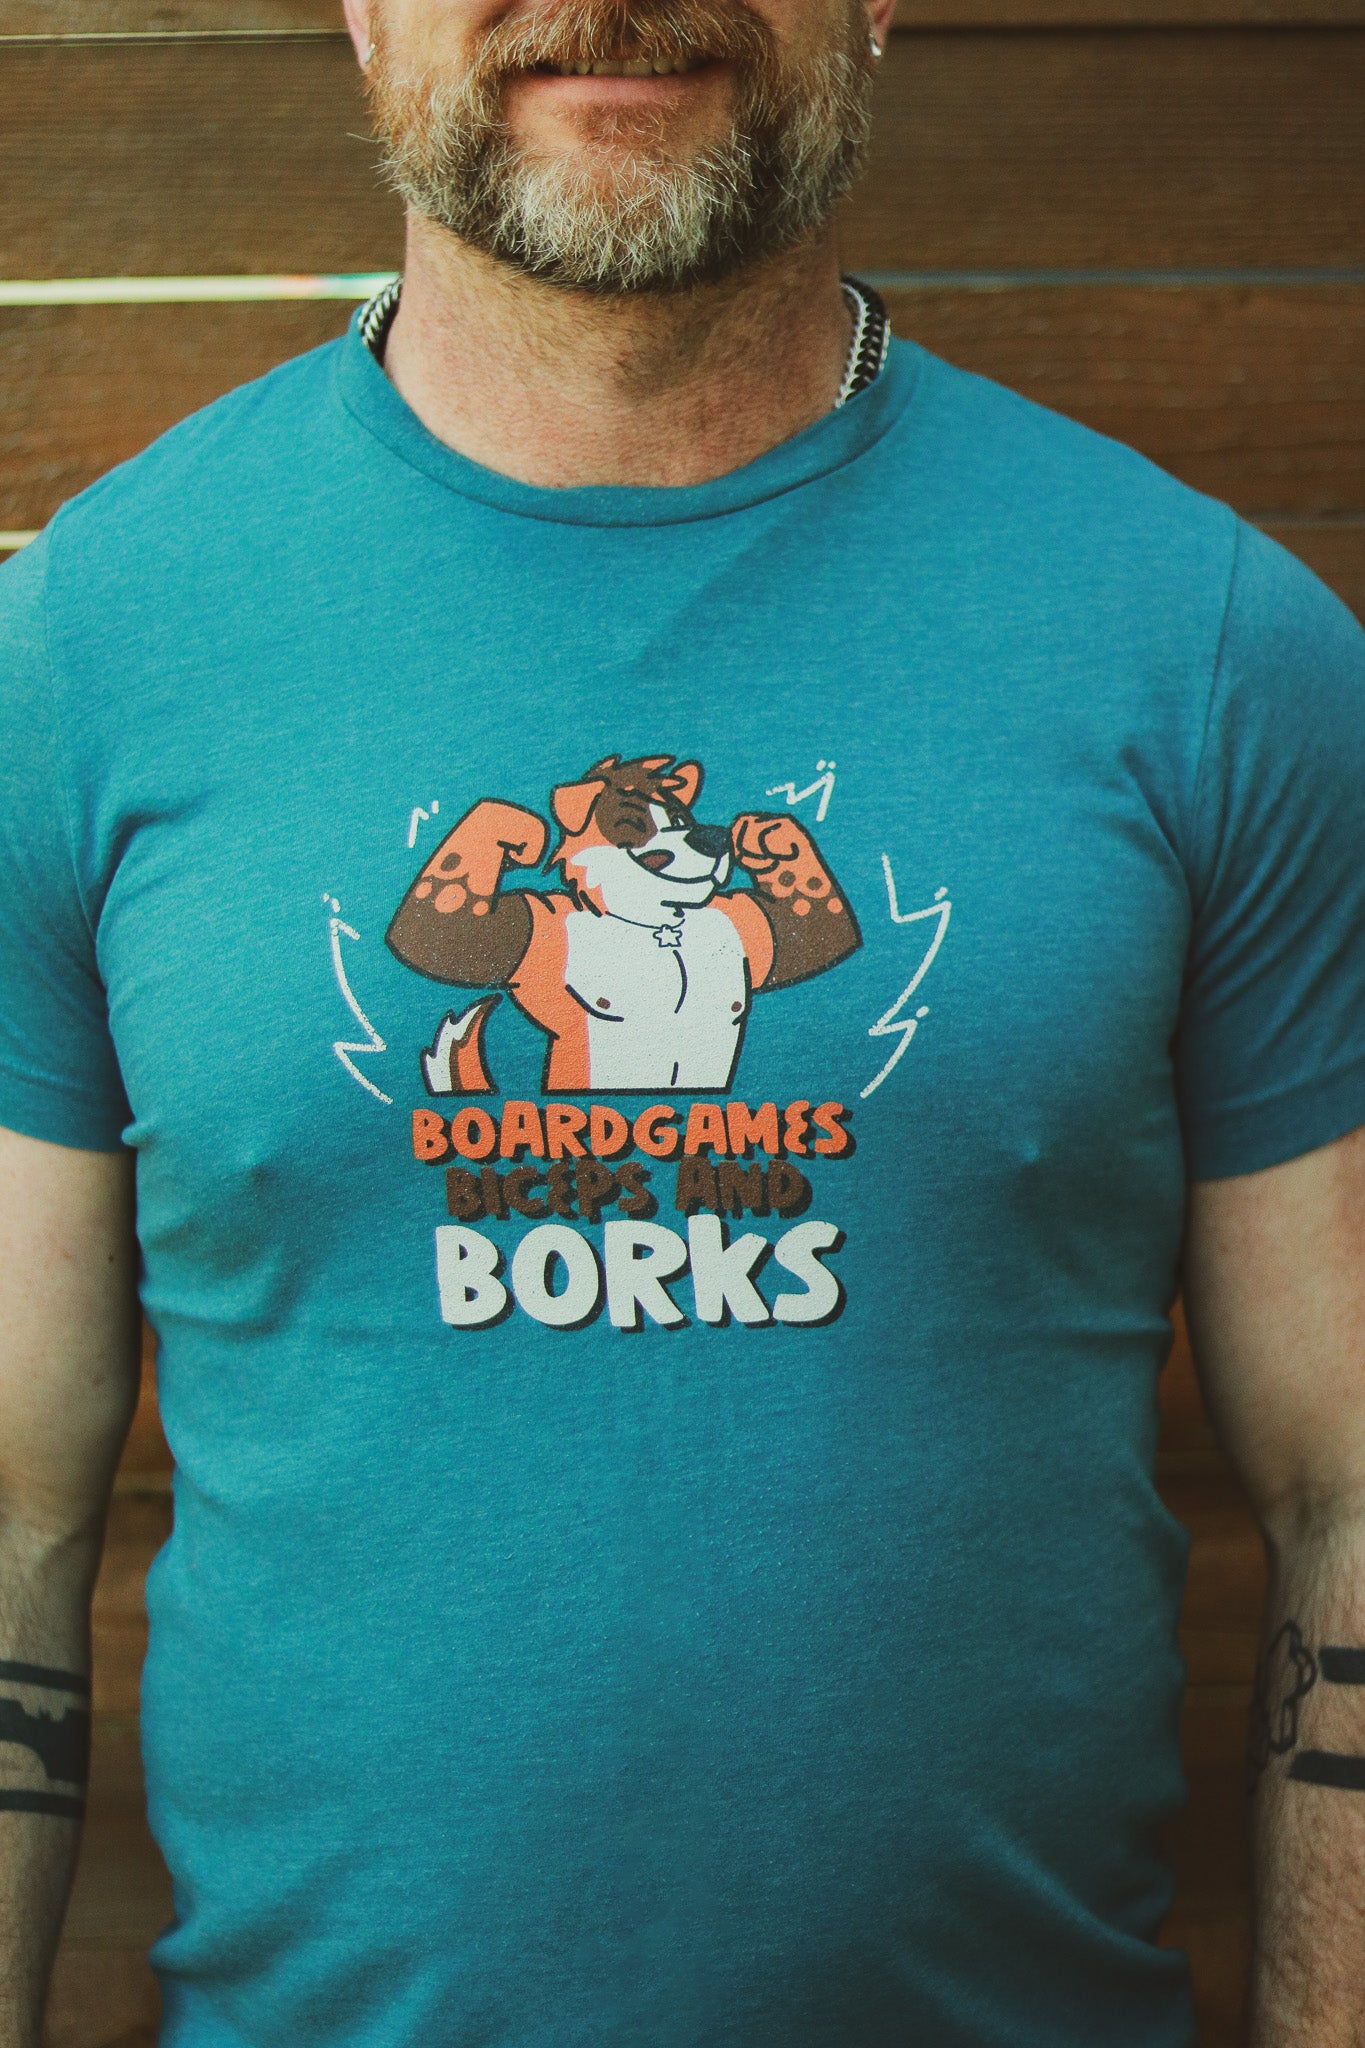 Man with a beard wearing blue heather shirt with orange and white flexing dog, text underneath reading 'Boardgames Biceps and Borks" 